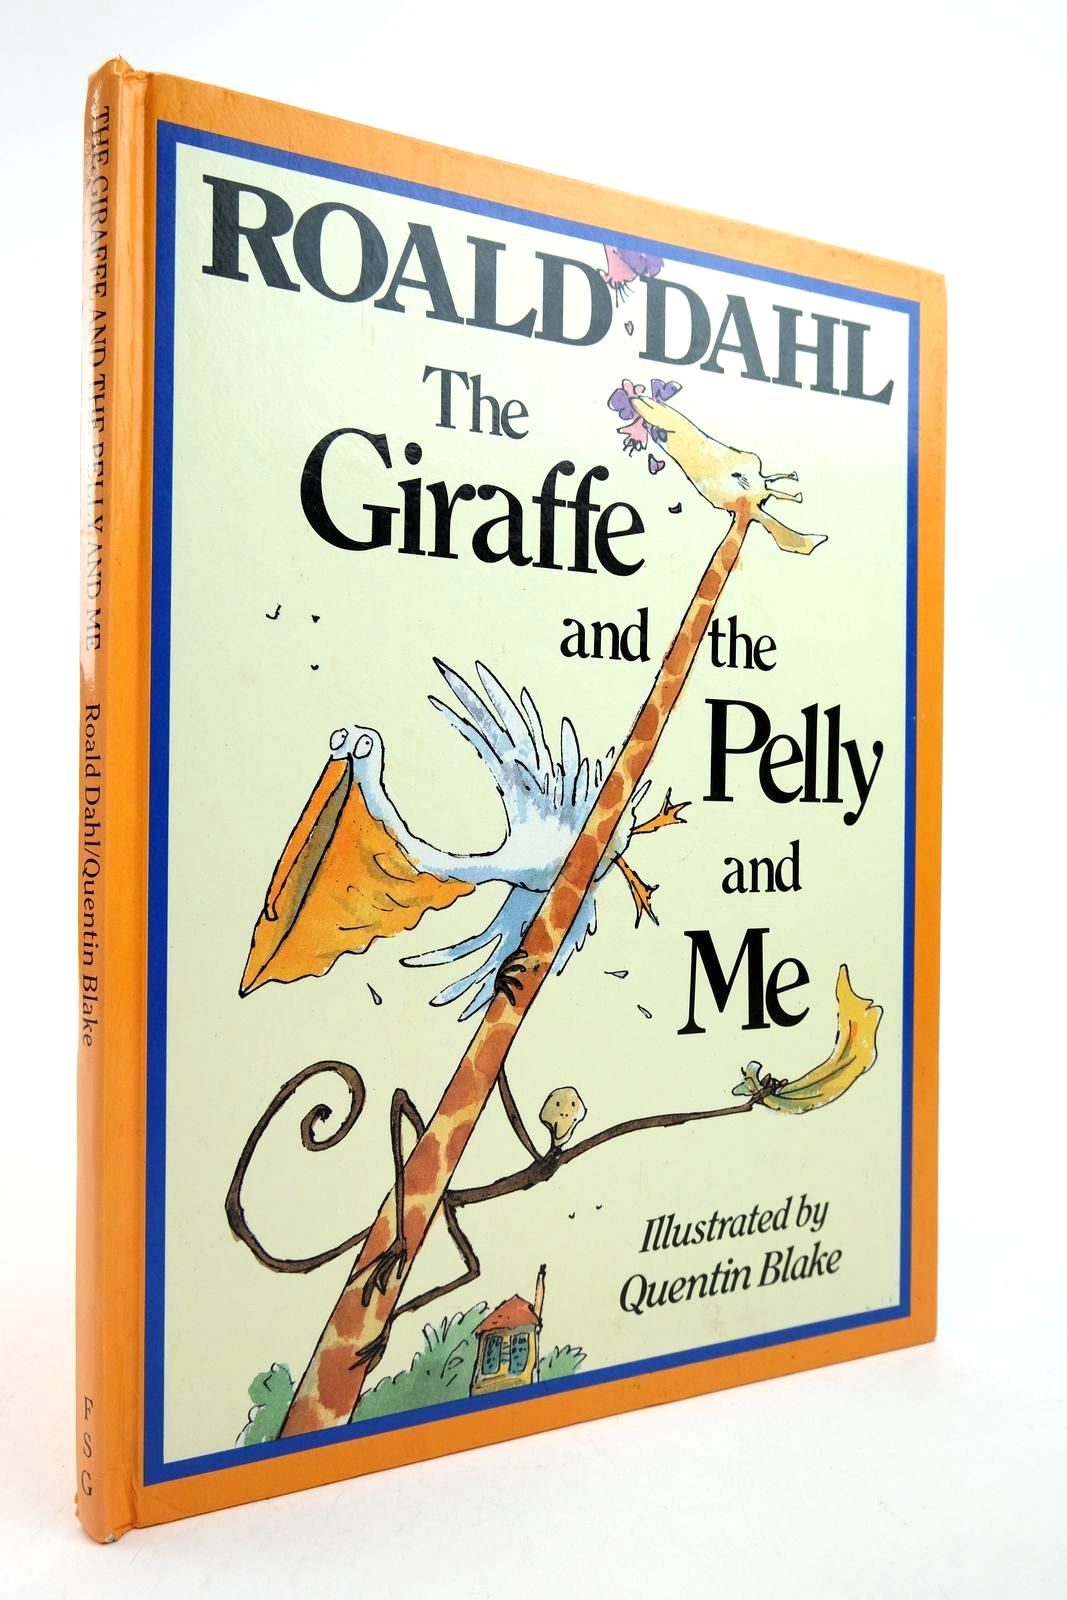 Photo of THE GIRAFFE AND THE PELLY AND ME written by Dahl, Roald illustrated by Blake, Quentin published by Farrar, Straus & Giroux (STOCK CODE: 2139241)  for sale by Stella & Rose's Books